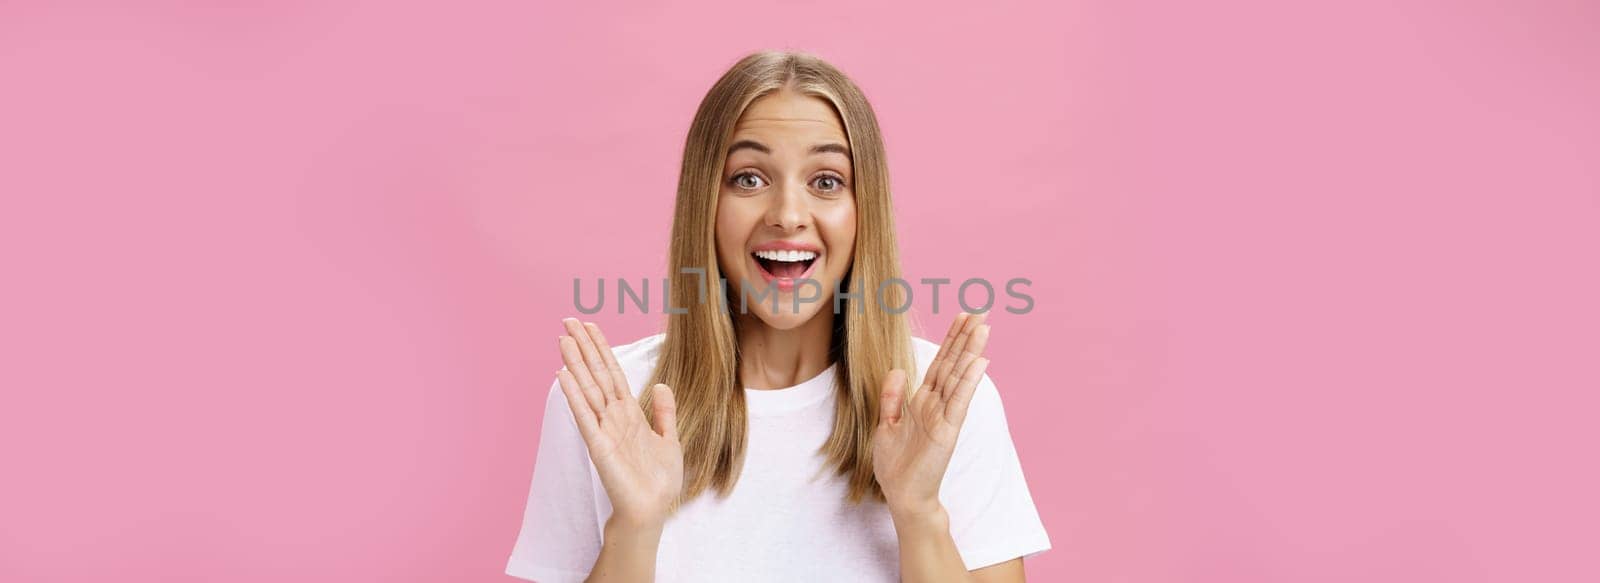 Woman learning awesome great news clasping hands in joy and excitement rejoicing feeling hapyp for friend smiling broadly and looking cheerful at camera with amused expression over pink background by Benzoix